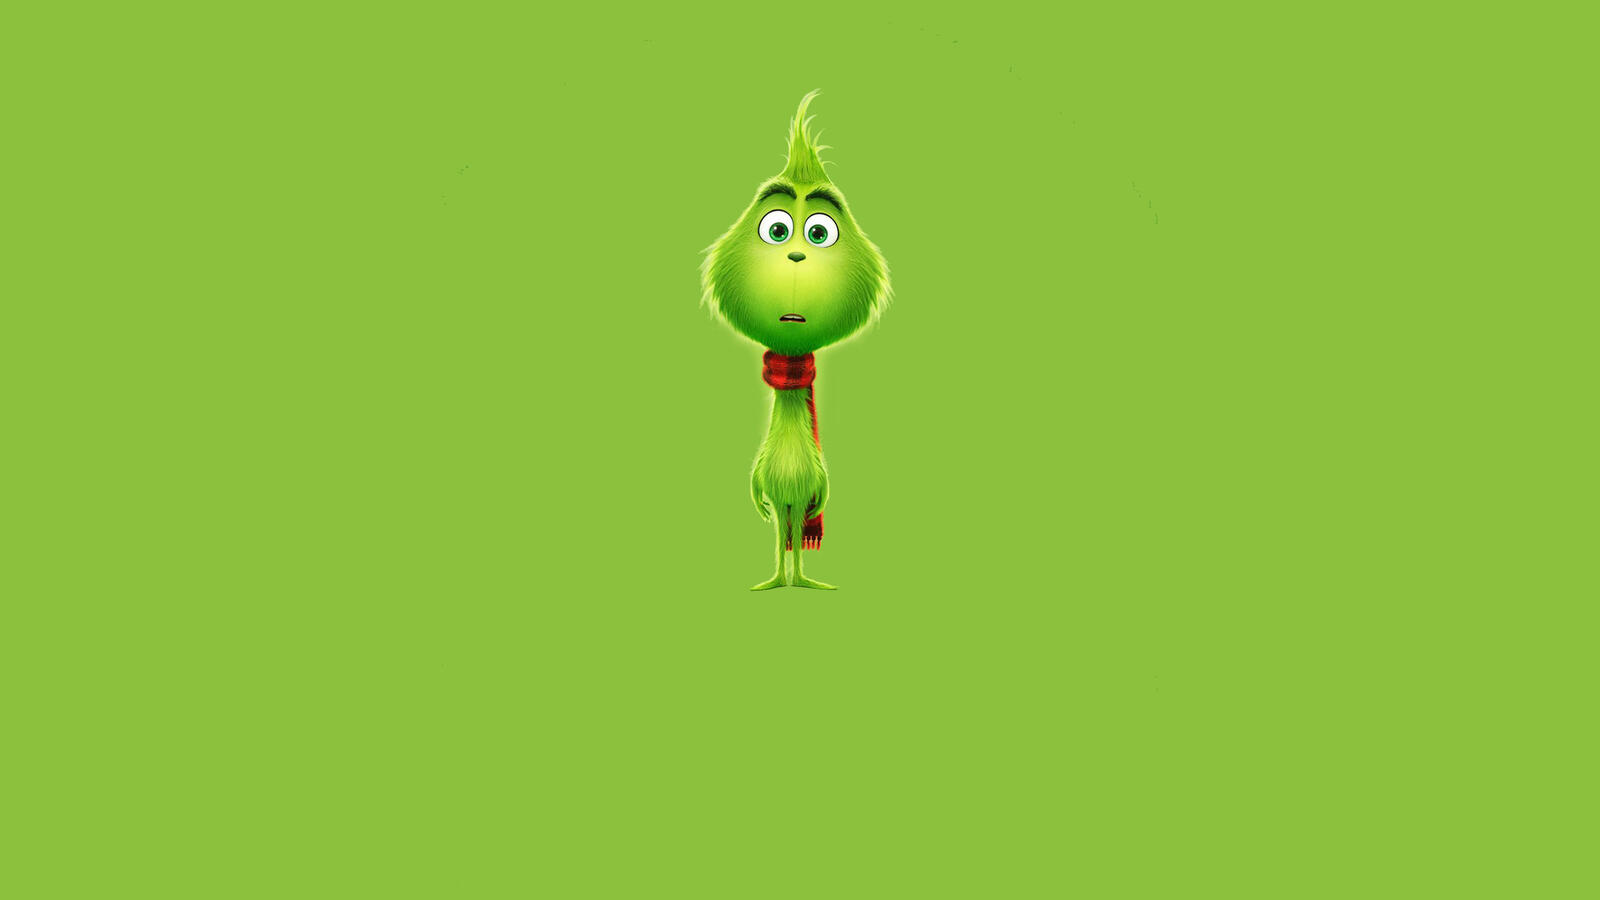 Wallpapers The Grinch the hero the villain on the desktop